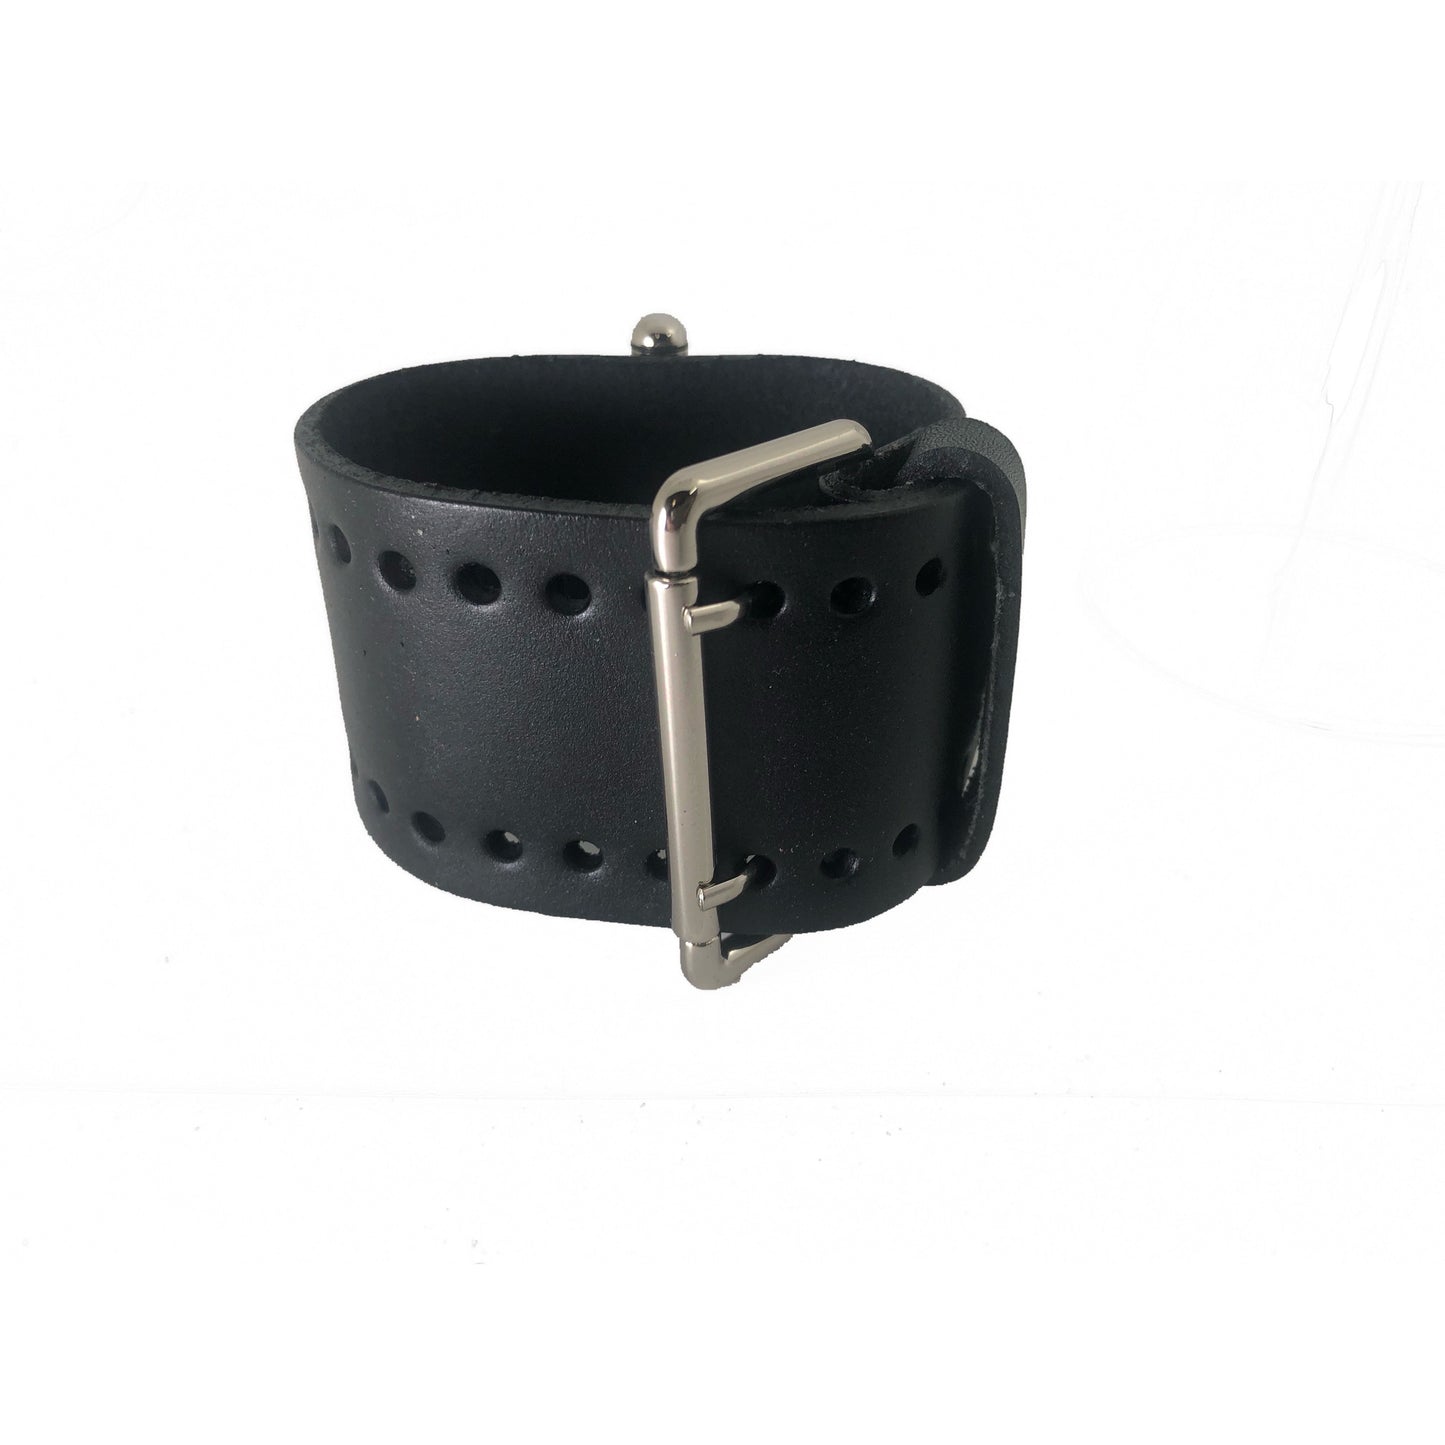 Teardrop Blue Watch with Perforated Black Leather Wide Cuff